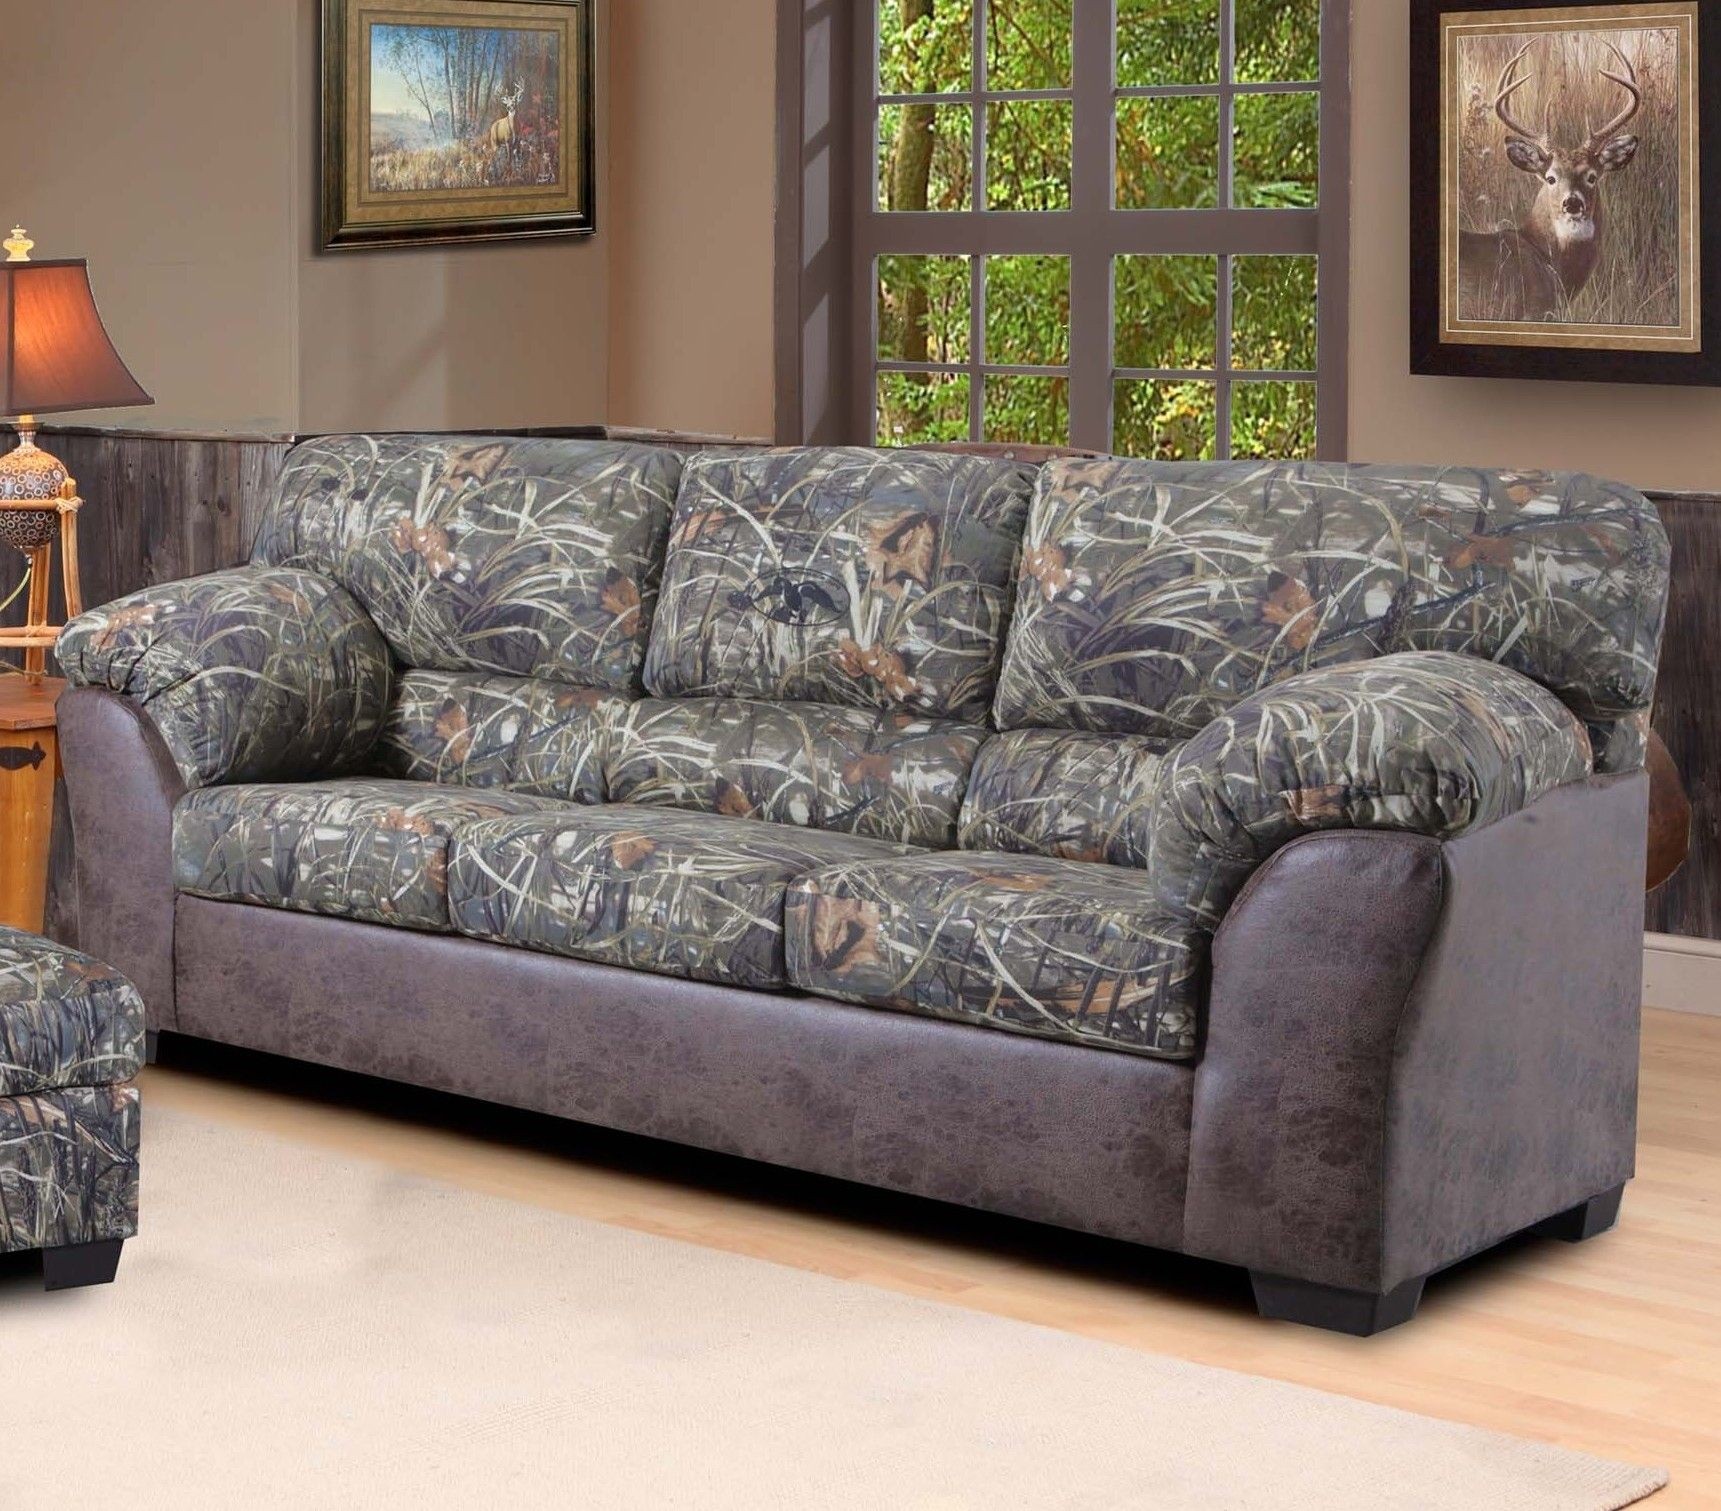 Camo sofa camo couch covers foter thesofa